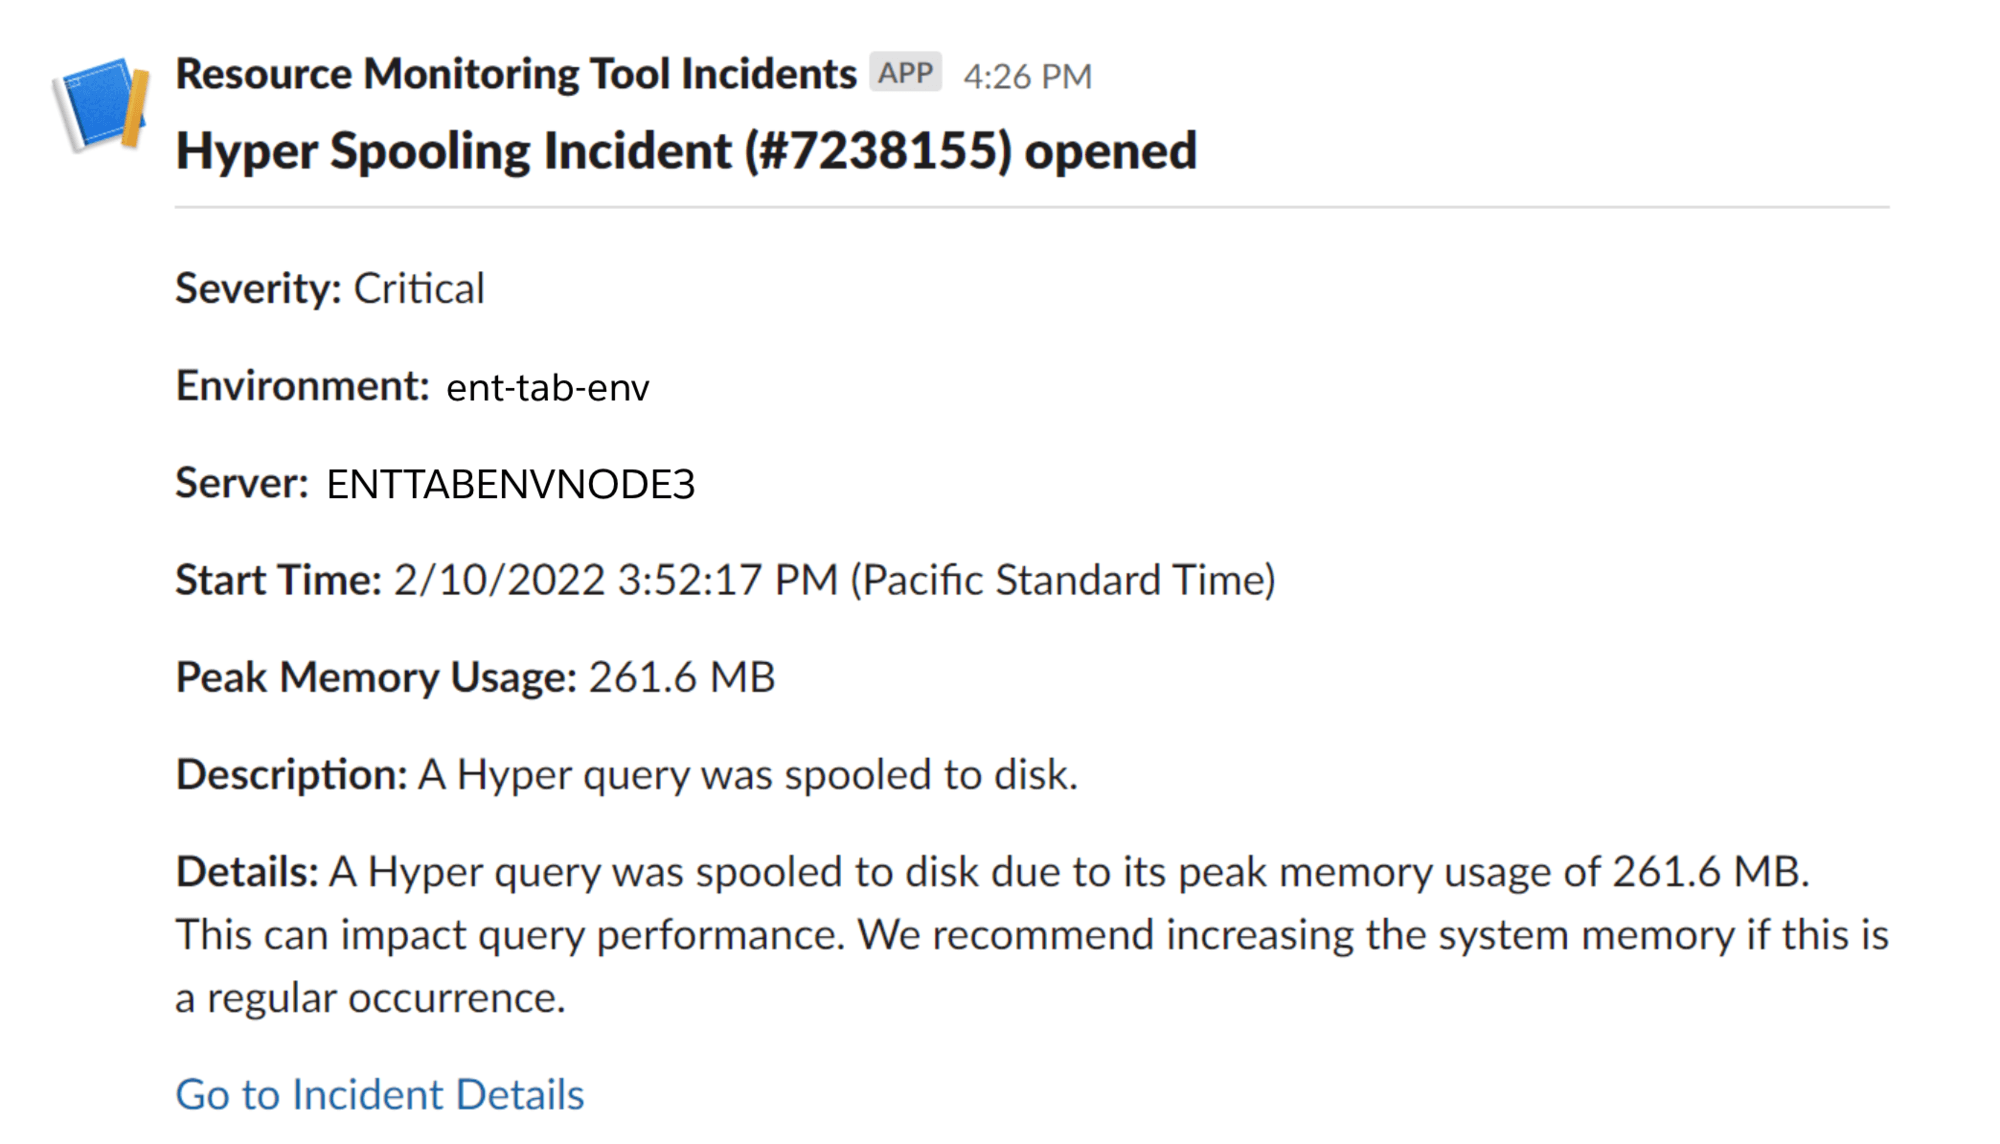 An image of a Slack notification from the Tableau Resource Monitoring Tool Incidents app that details a Hyper spooling incident, including the severity, environment, server, start time, peak memory usage, description, additional details, and a link to the recorded incident.